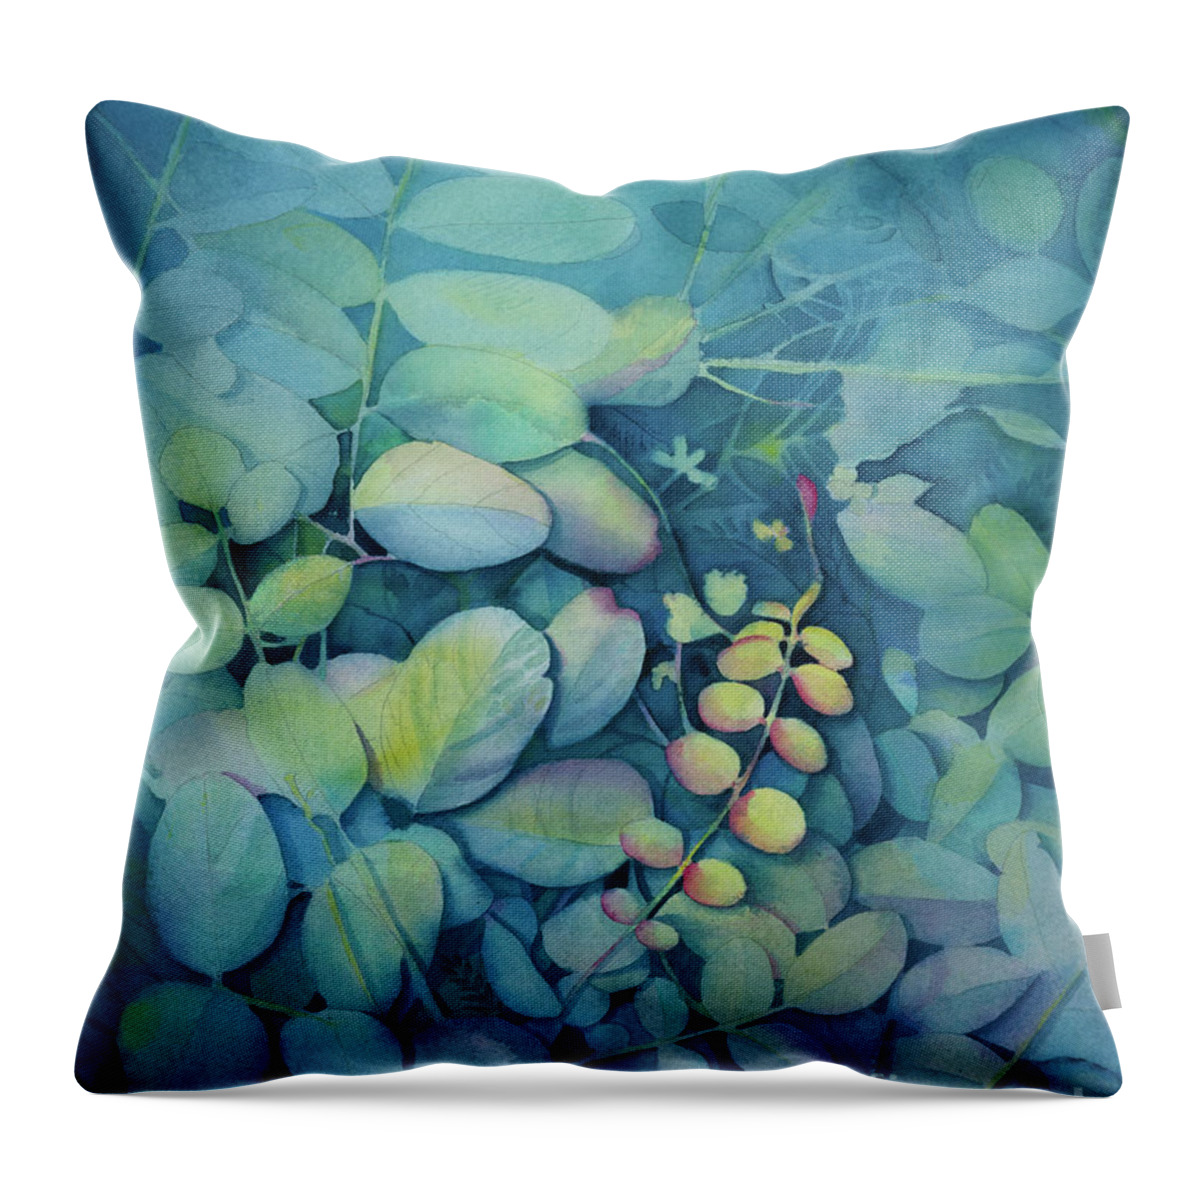 #originalfineart #watercolorpainting #watercolor #watercolorflow Throw Pillow featuring the painting Forest Flora by Lois Blasberg